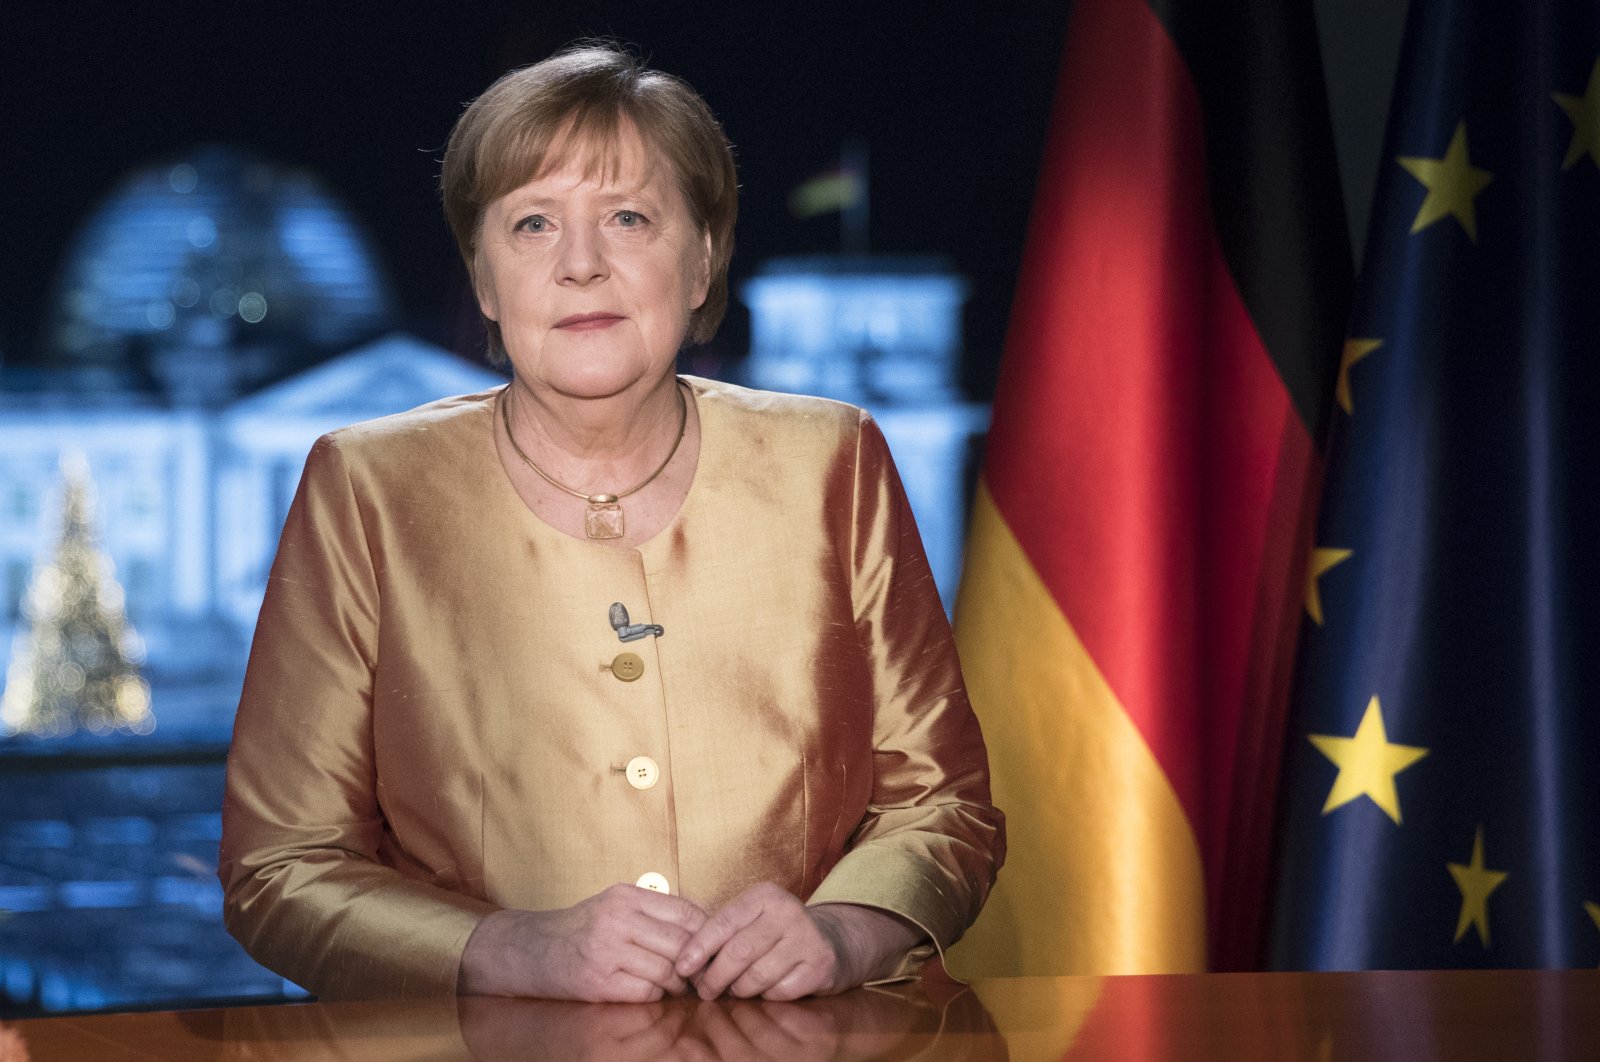 German Chancellor Angela Merkel poses for photographs after the television recording of her annual New Year's speech at the chancellery in Berlin, Germany, Wednesday, Dec. 30, 2020. (AP Photo)